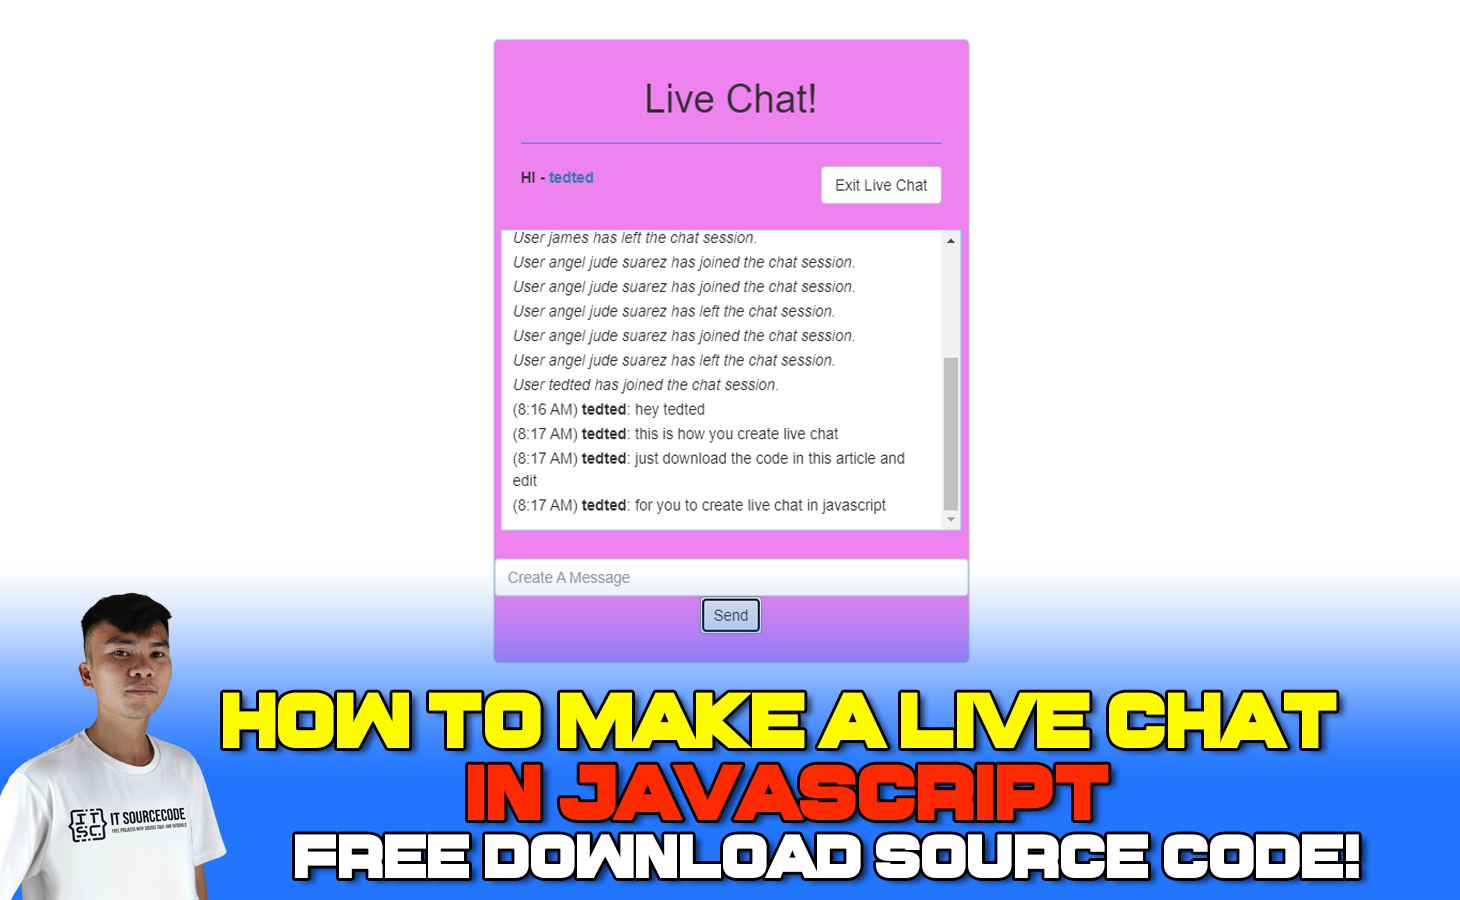 Live chat download